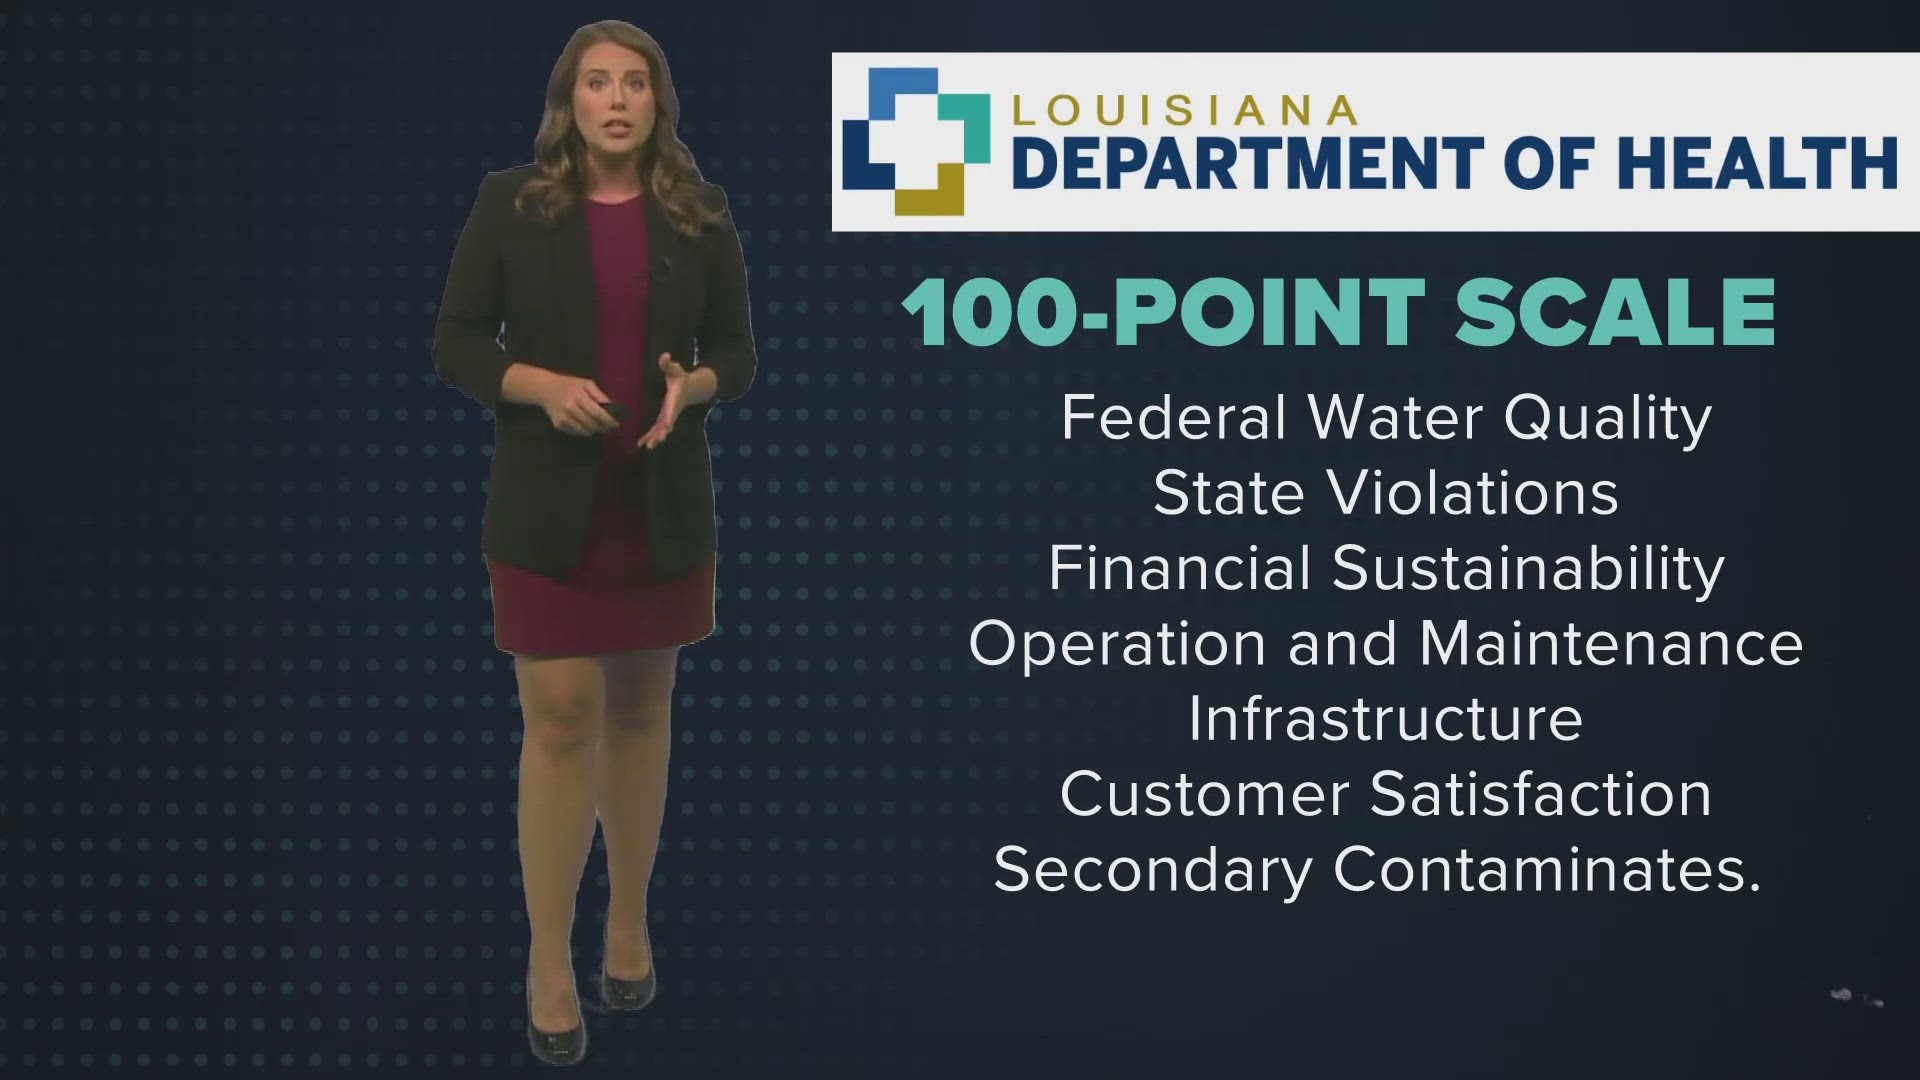 The Louisiana Department of Health has released the grades for water systems across the state. So, does your water make the grade?